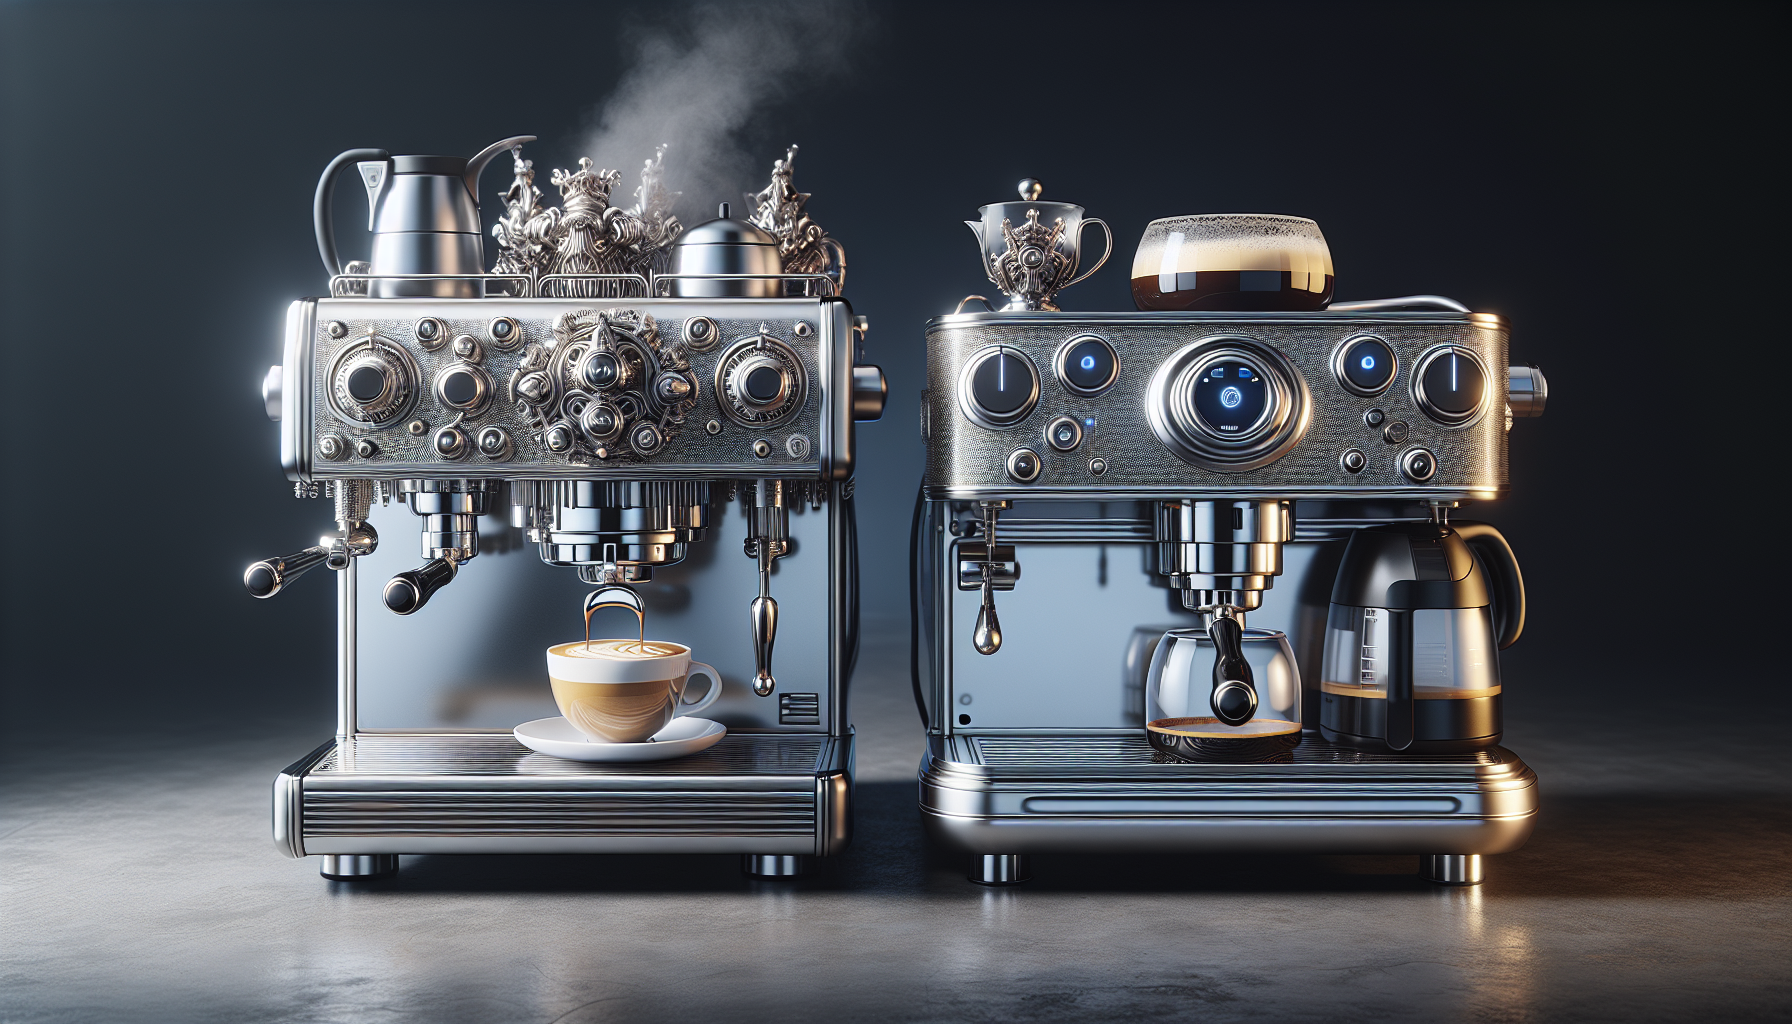 Does The Espresso Machine Make A Difference?